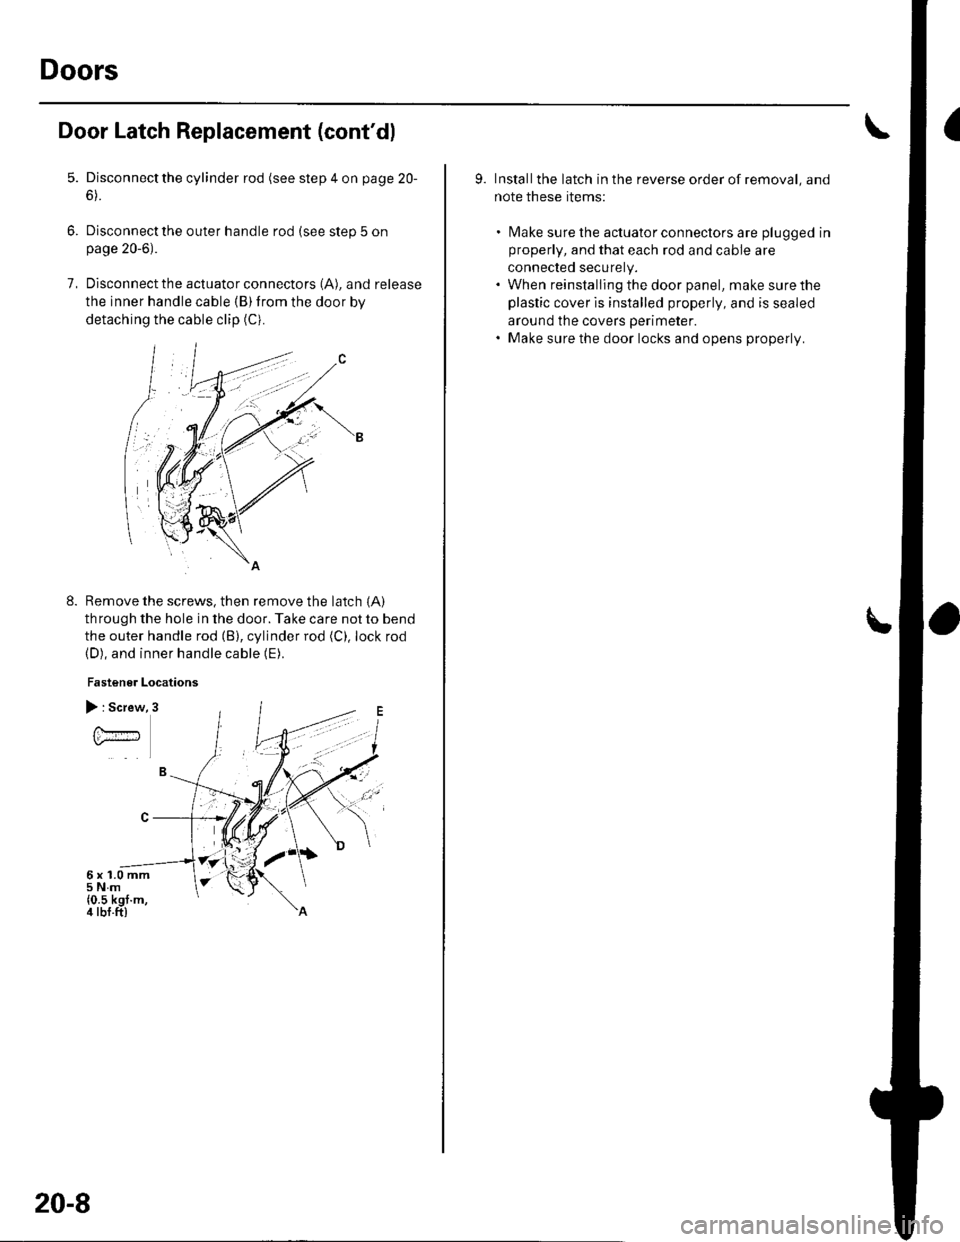 HONDA CIVIC 2003 7.G User Guide Doors
Door Latch Replacement (contdl
5.
6.
7.
Disconnect the cylinder rod (see step 4 on page 20-
6).
Disconnect the outer handle rod (see step 5 onpage 20-6).
Disconnect the actuator connectors (A),